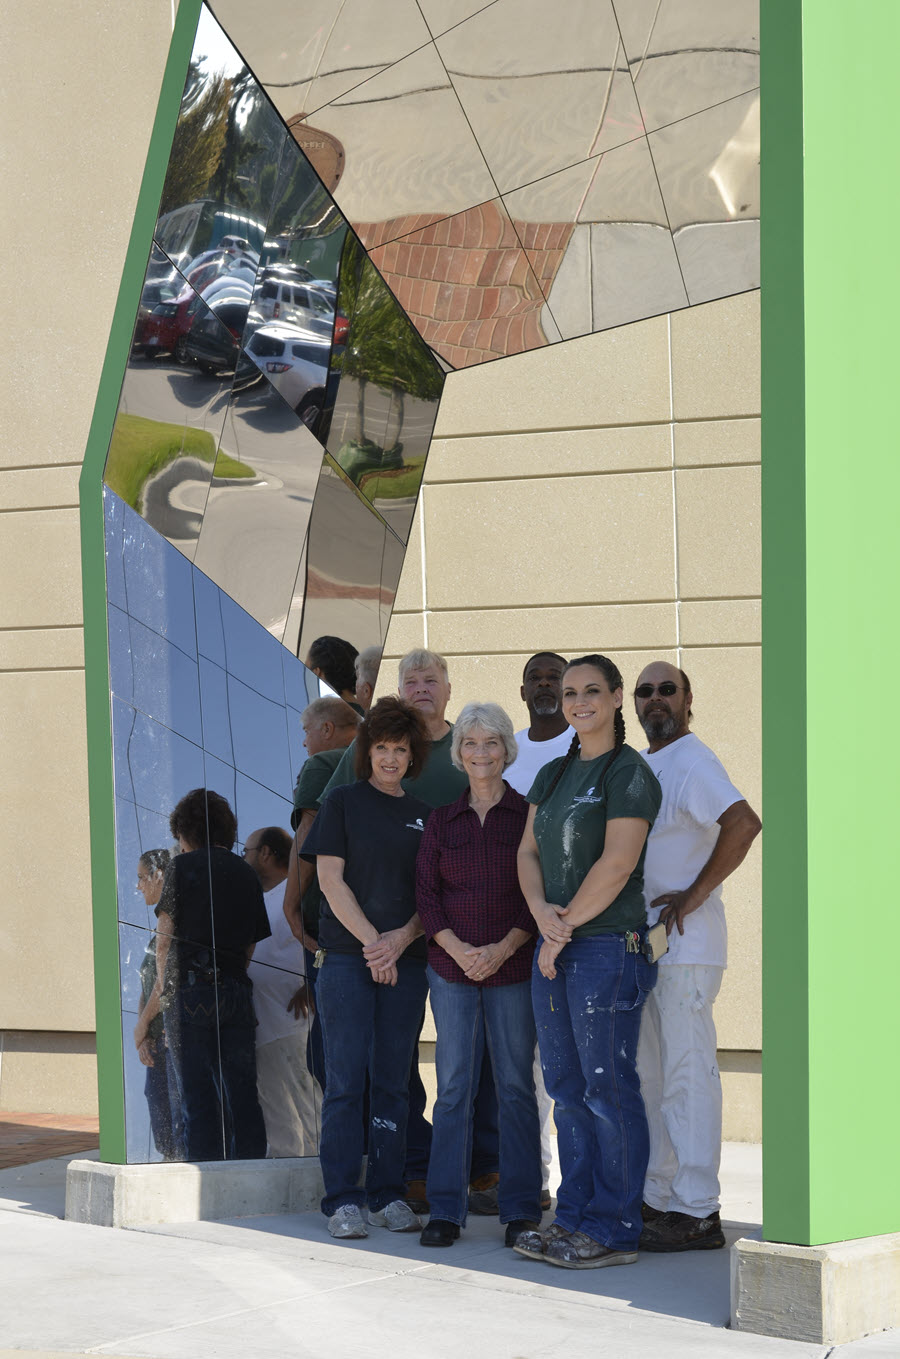 Photo of Paint Shop crew standing inside of campus art installation at Spartan Stadium